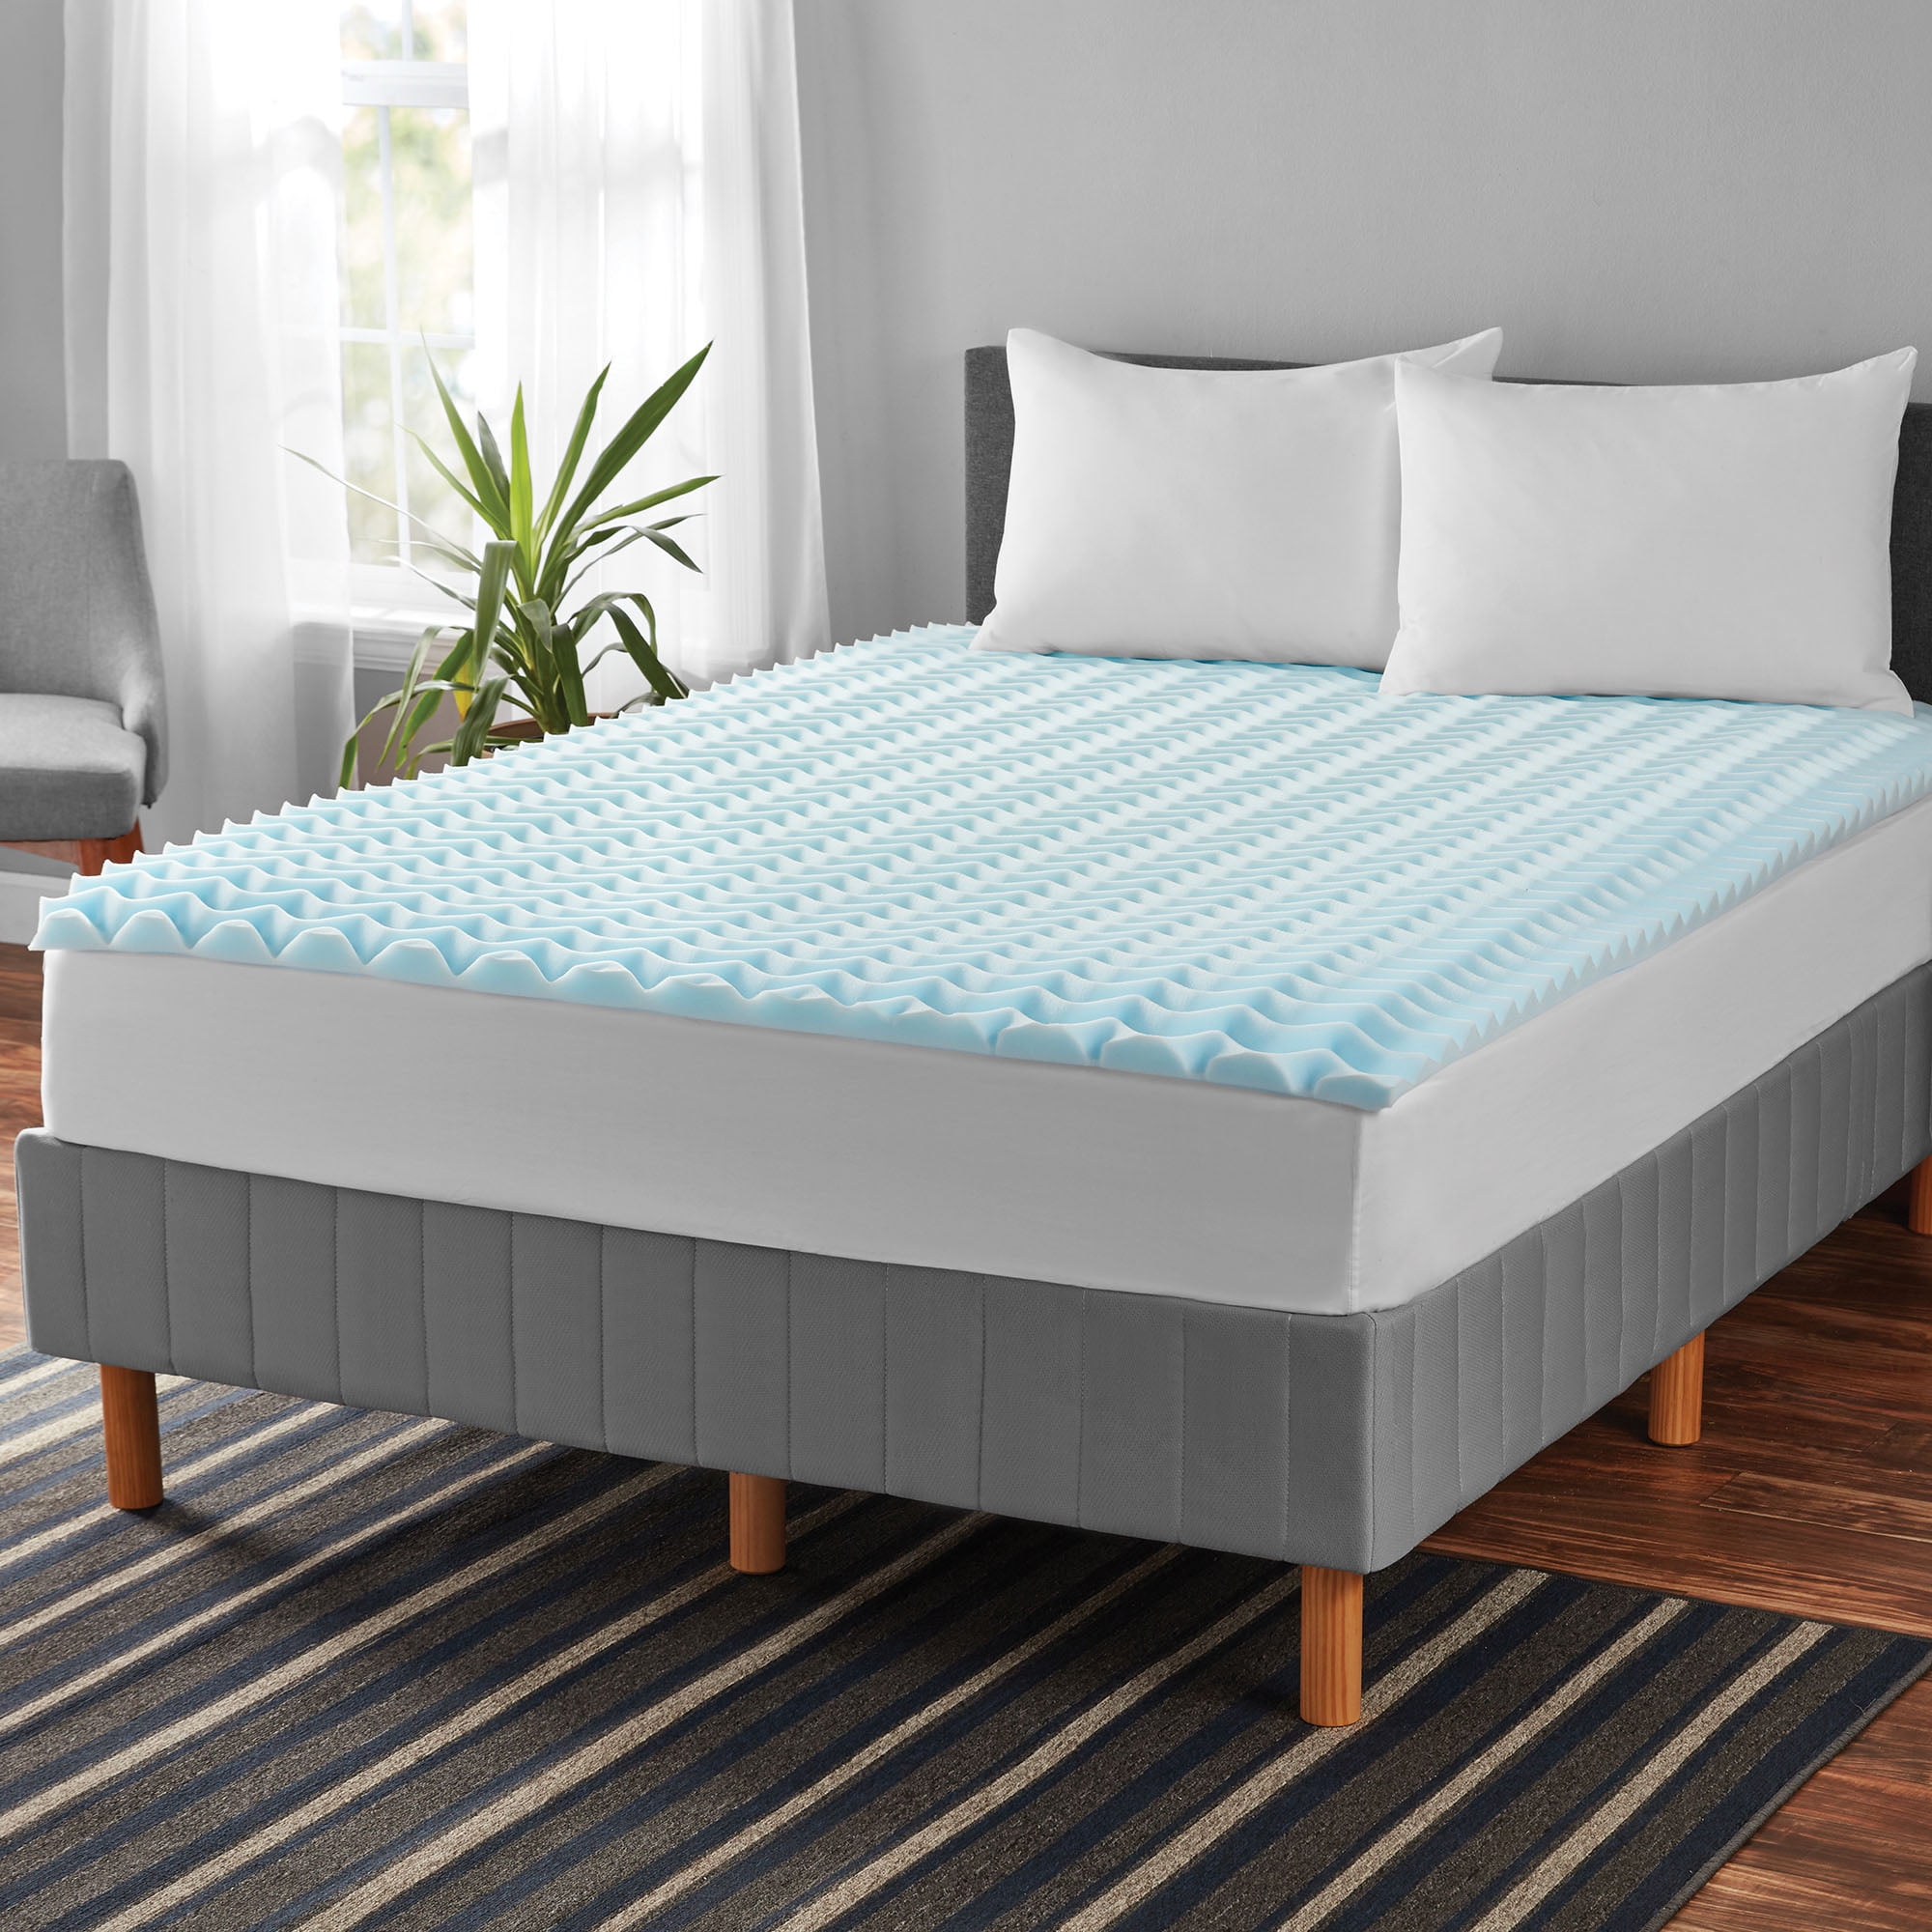 Space Foam Mattress Topper Cheapest Offers 54 Off Chesterresidents Org